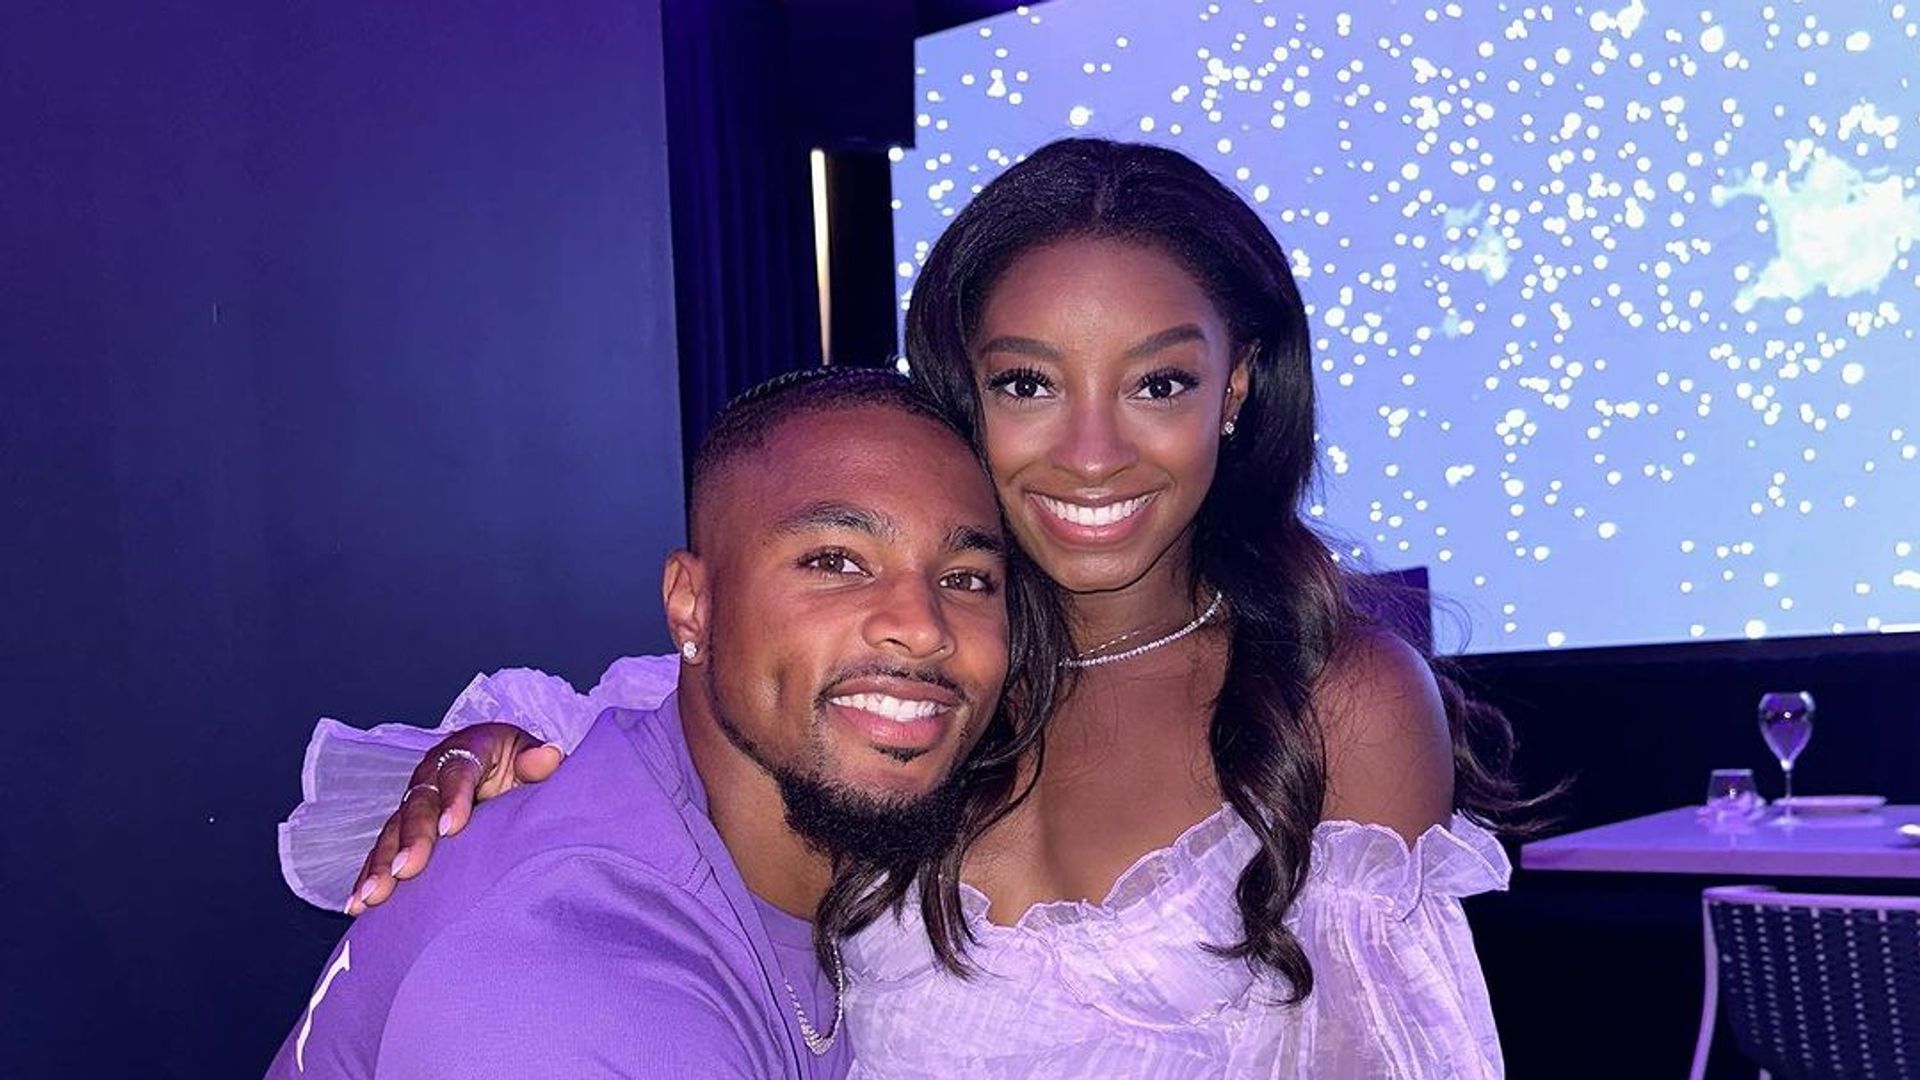 Simone Biles celebrates first wedding anniversary with husband after revealing she 'broke down' over backlash to viral comments